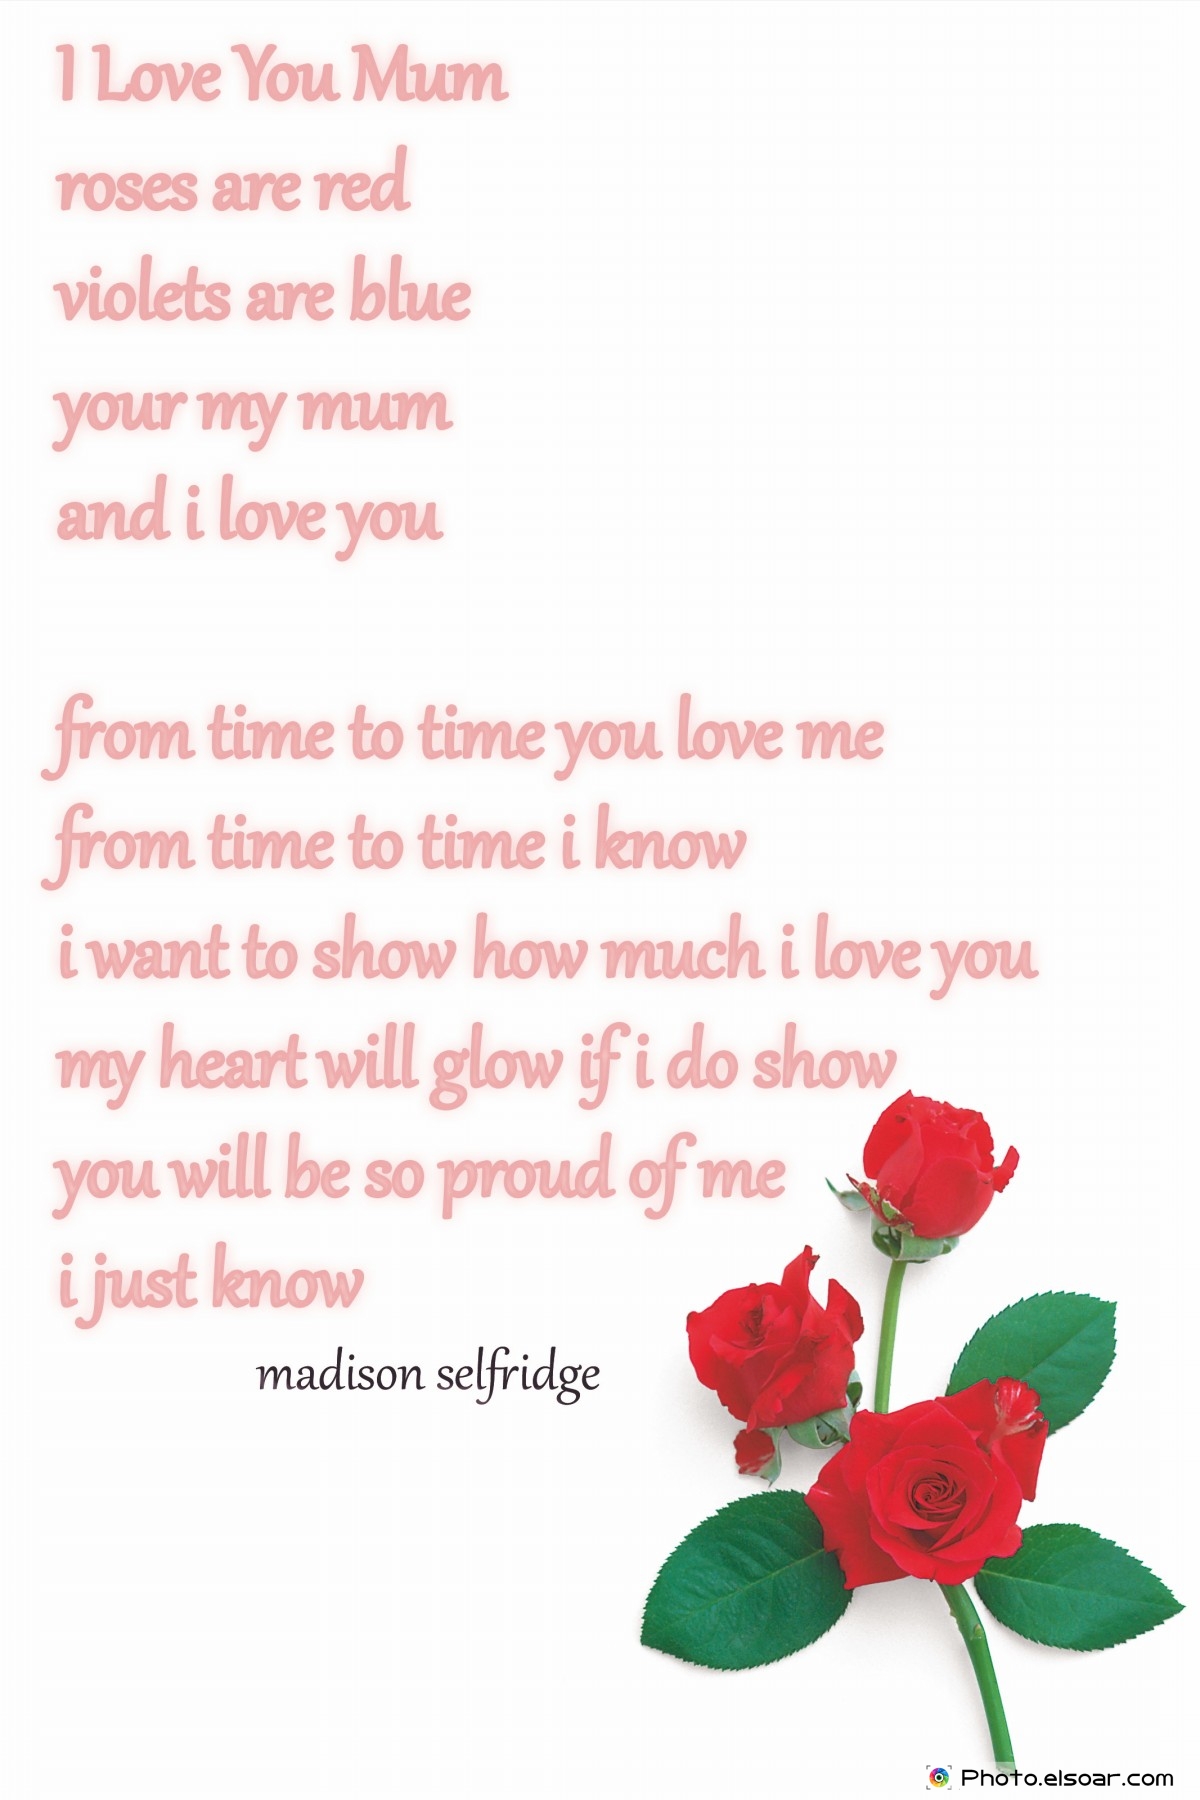 Mothers Day Poem - Love Mothers Day Poem - HD Wallpaper 